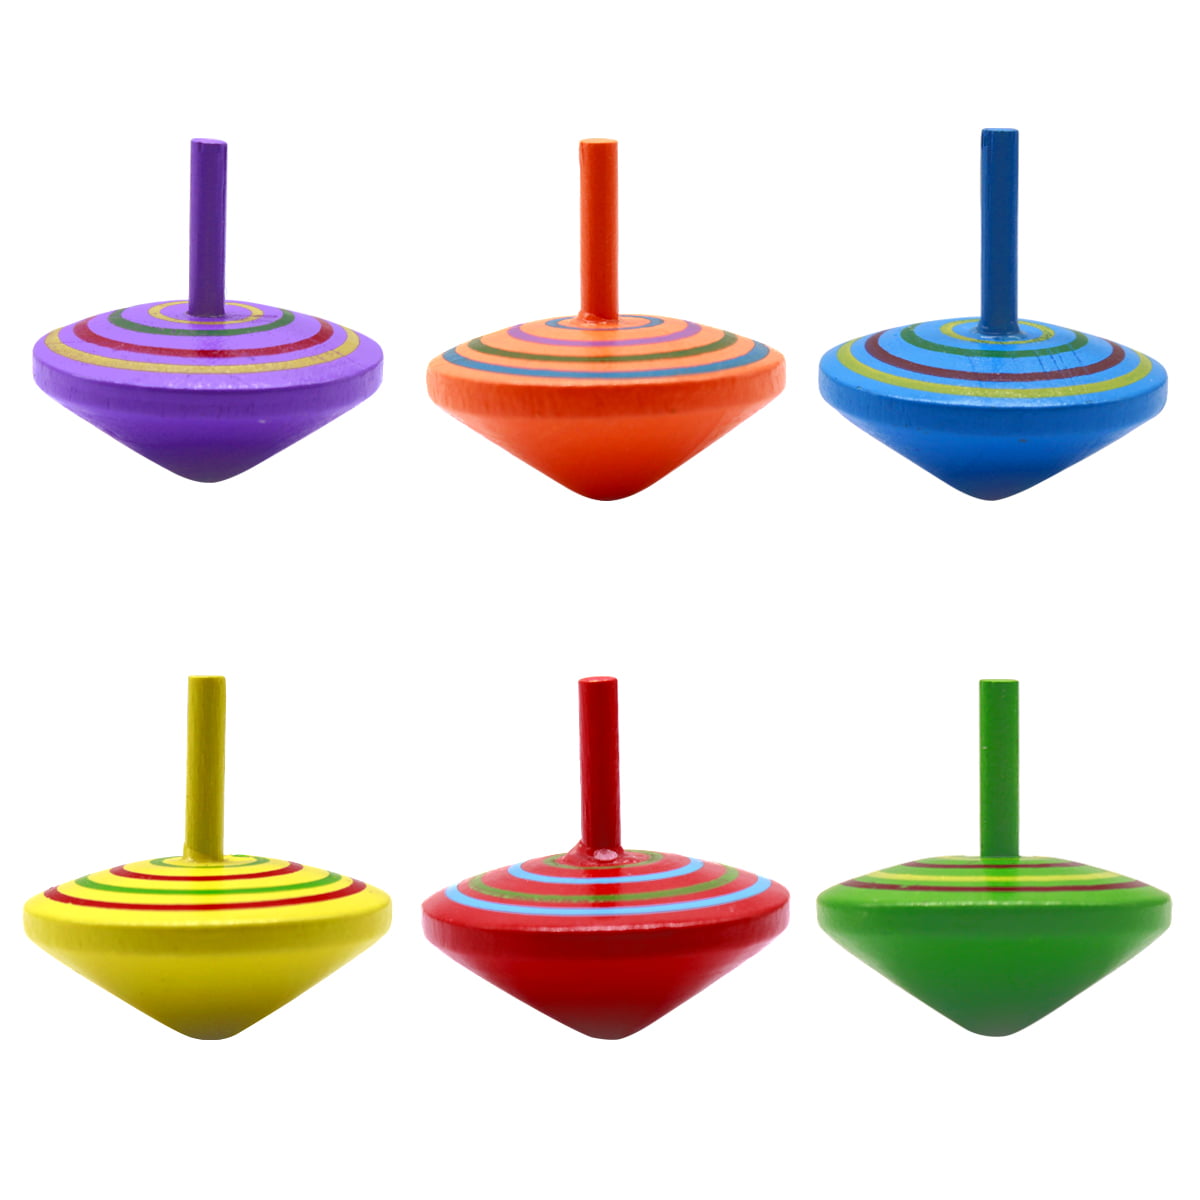 18pcs Wooden Spinning Top Safe Non-toxic Wood Colorful Toy For Kids Children 